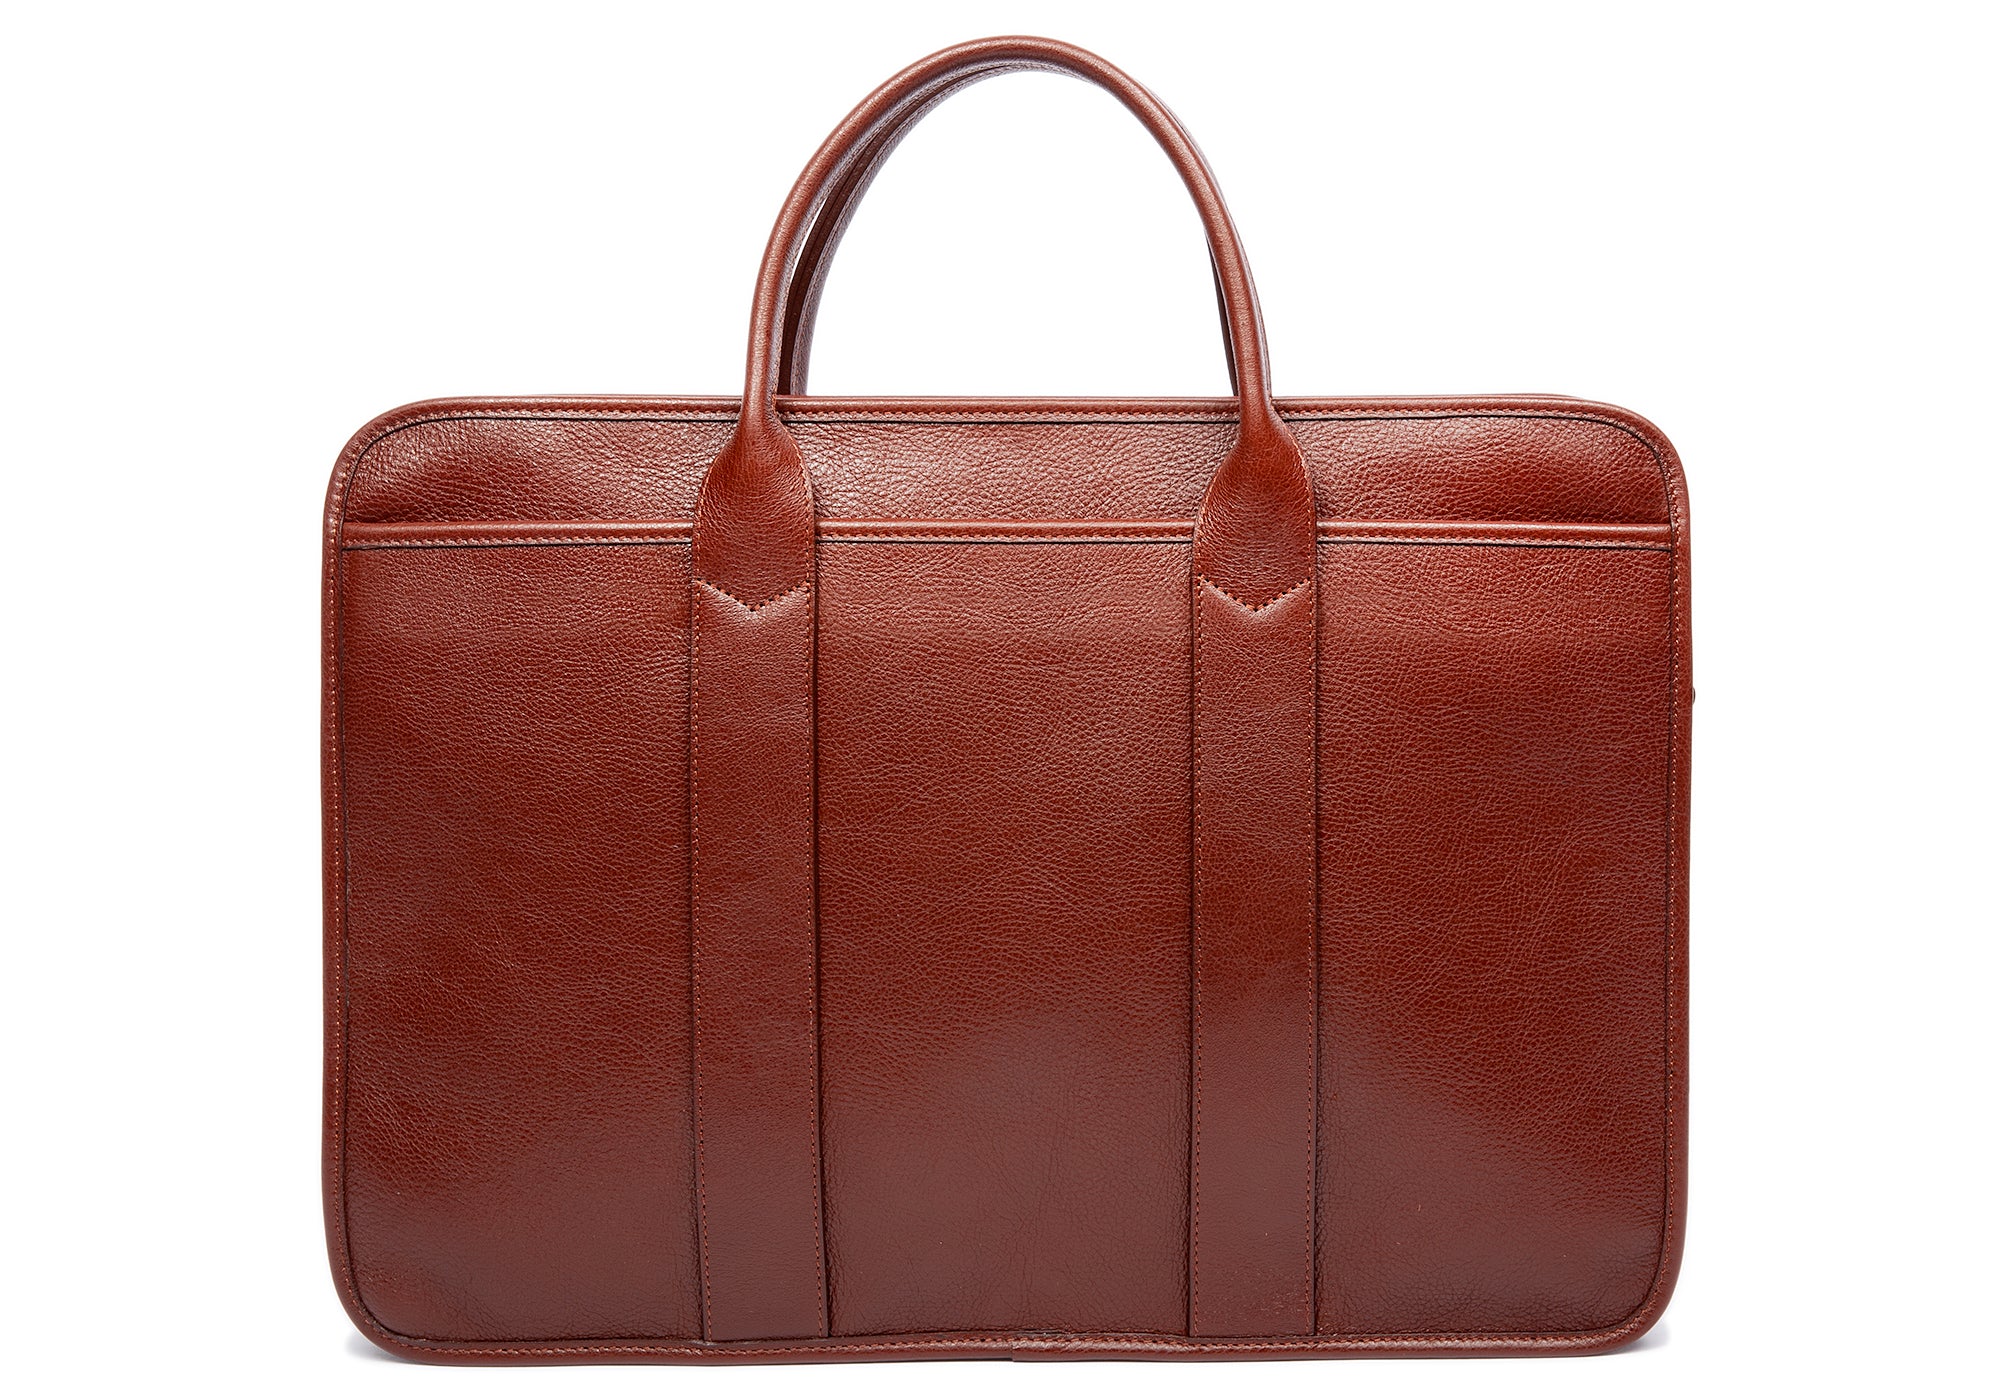 Leather Briefcase For Men - Buy The Best Man's Briefcases